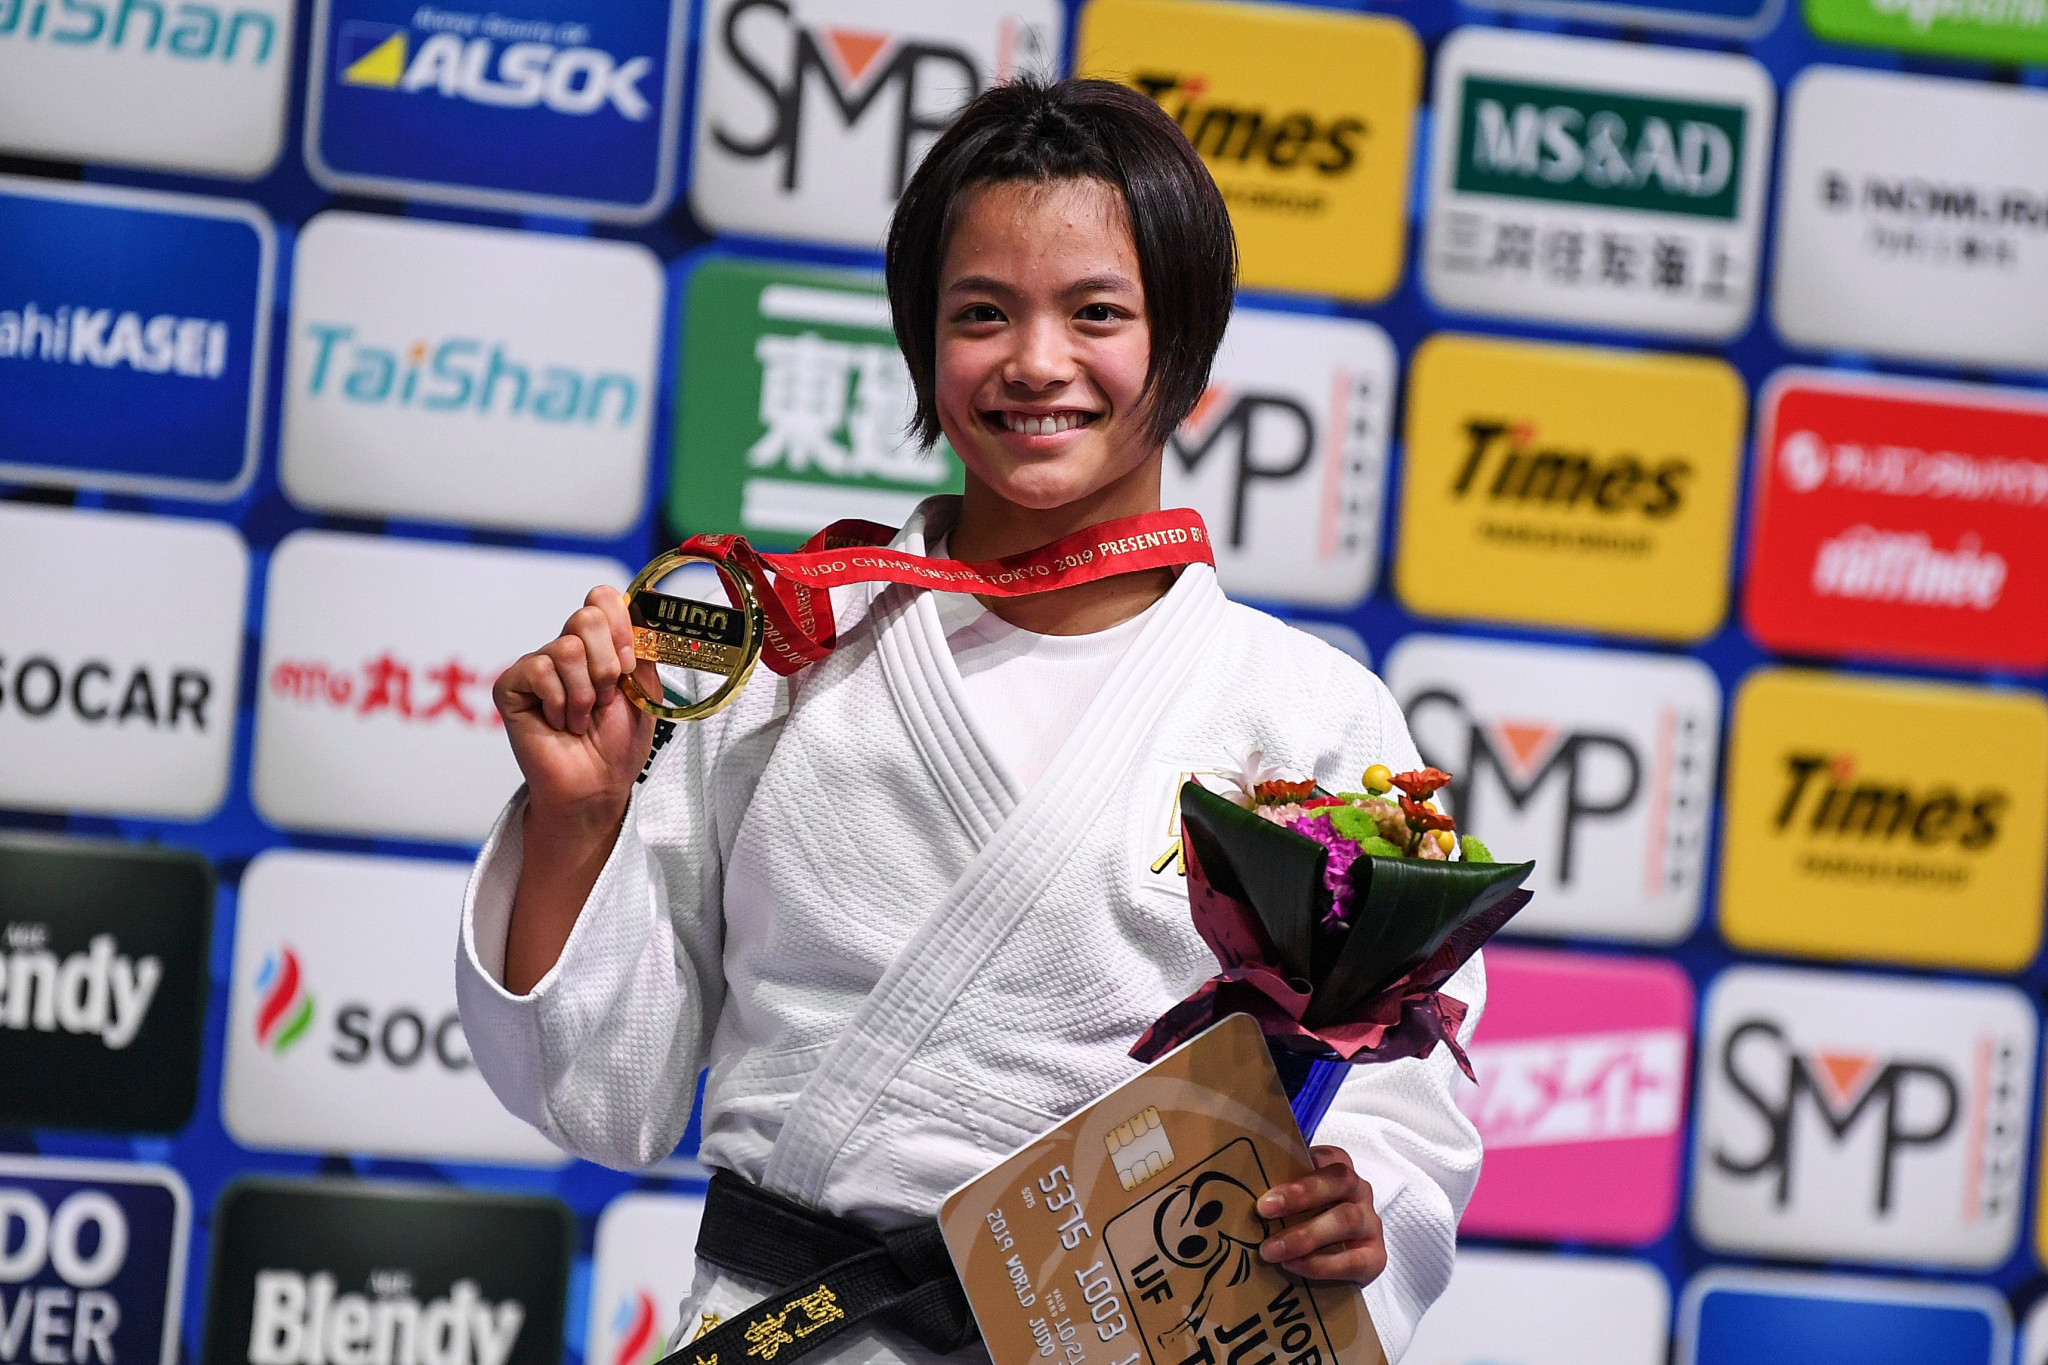 Hosts Japan won both gold medals on offer on the second day of the IJF World Championships in Tokyo ©Getty Images